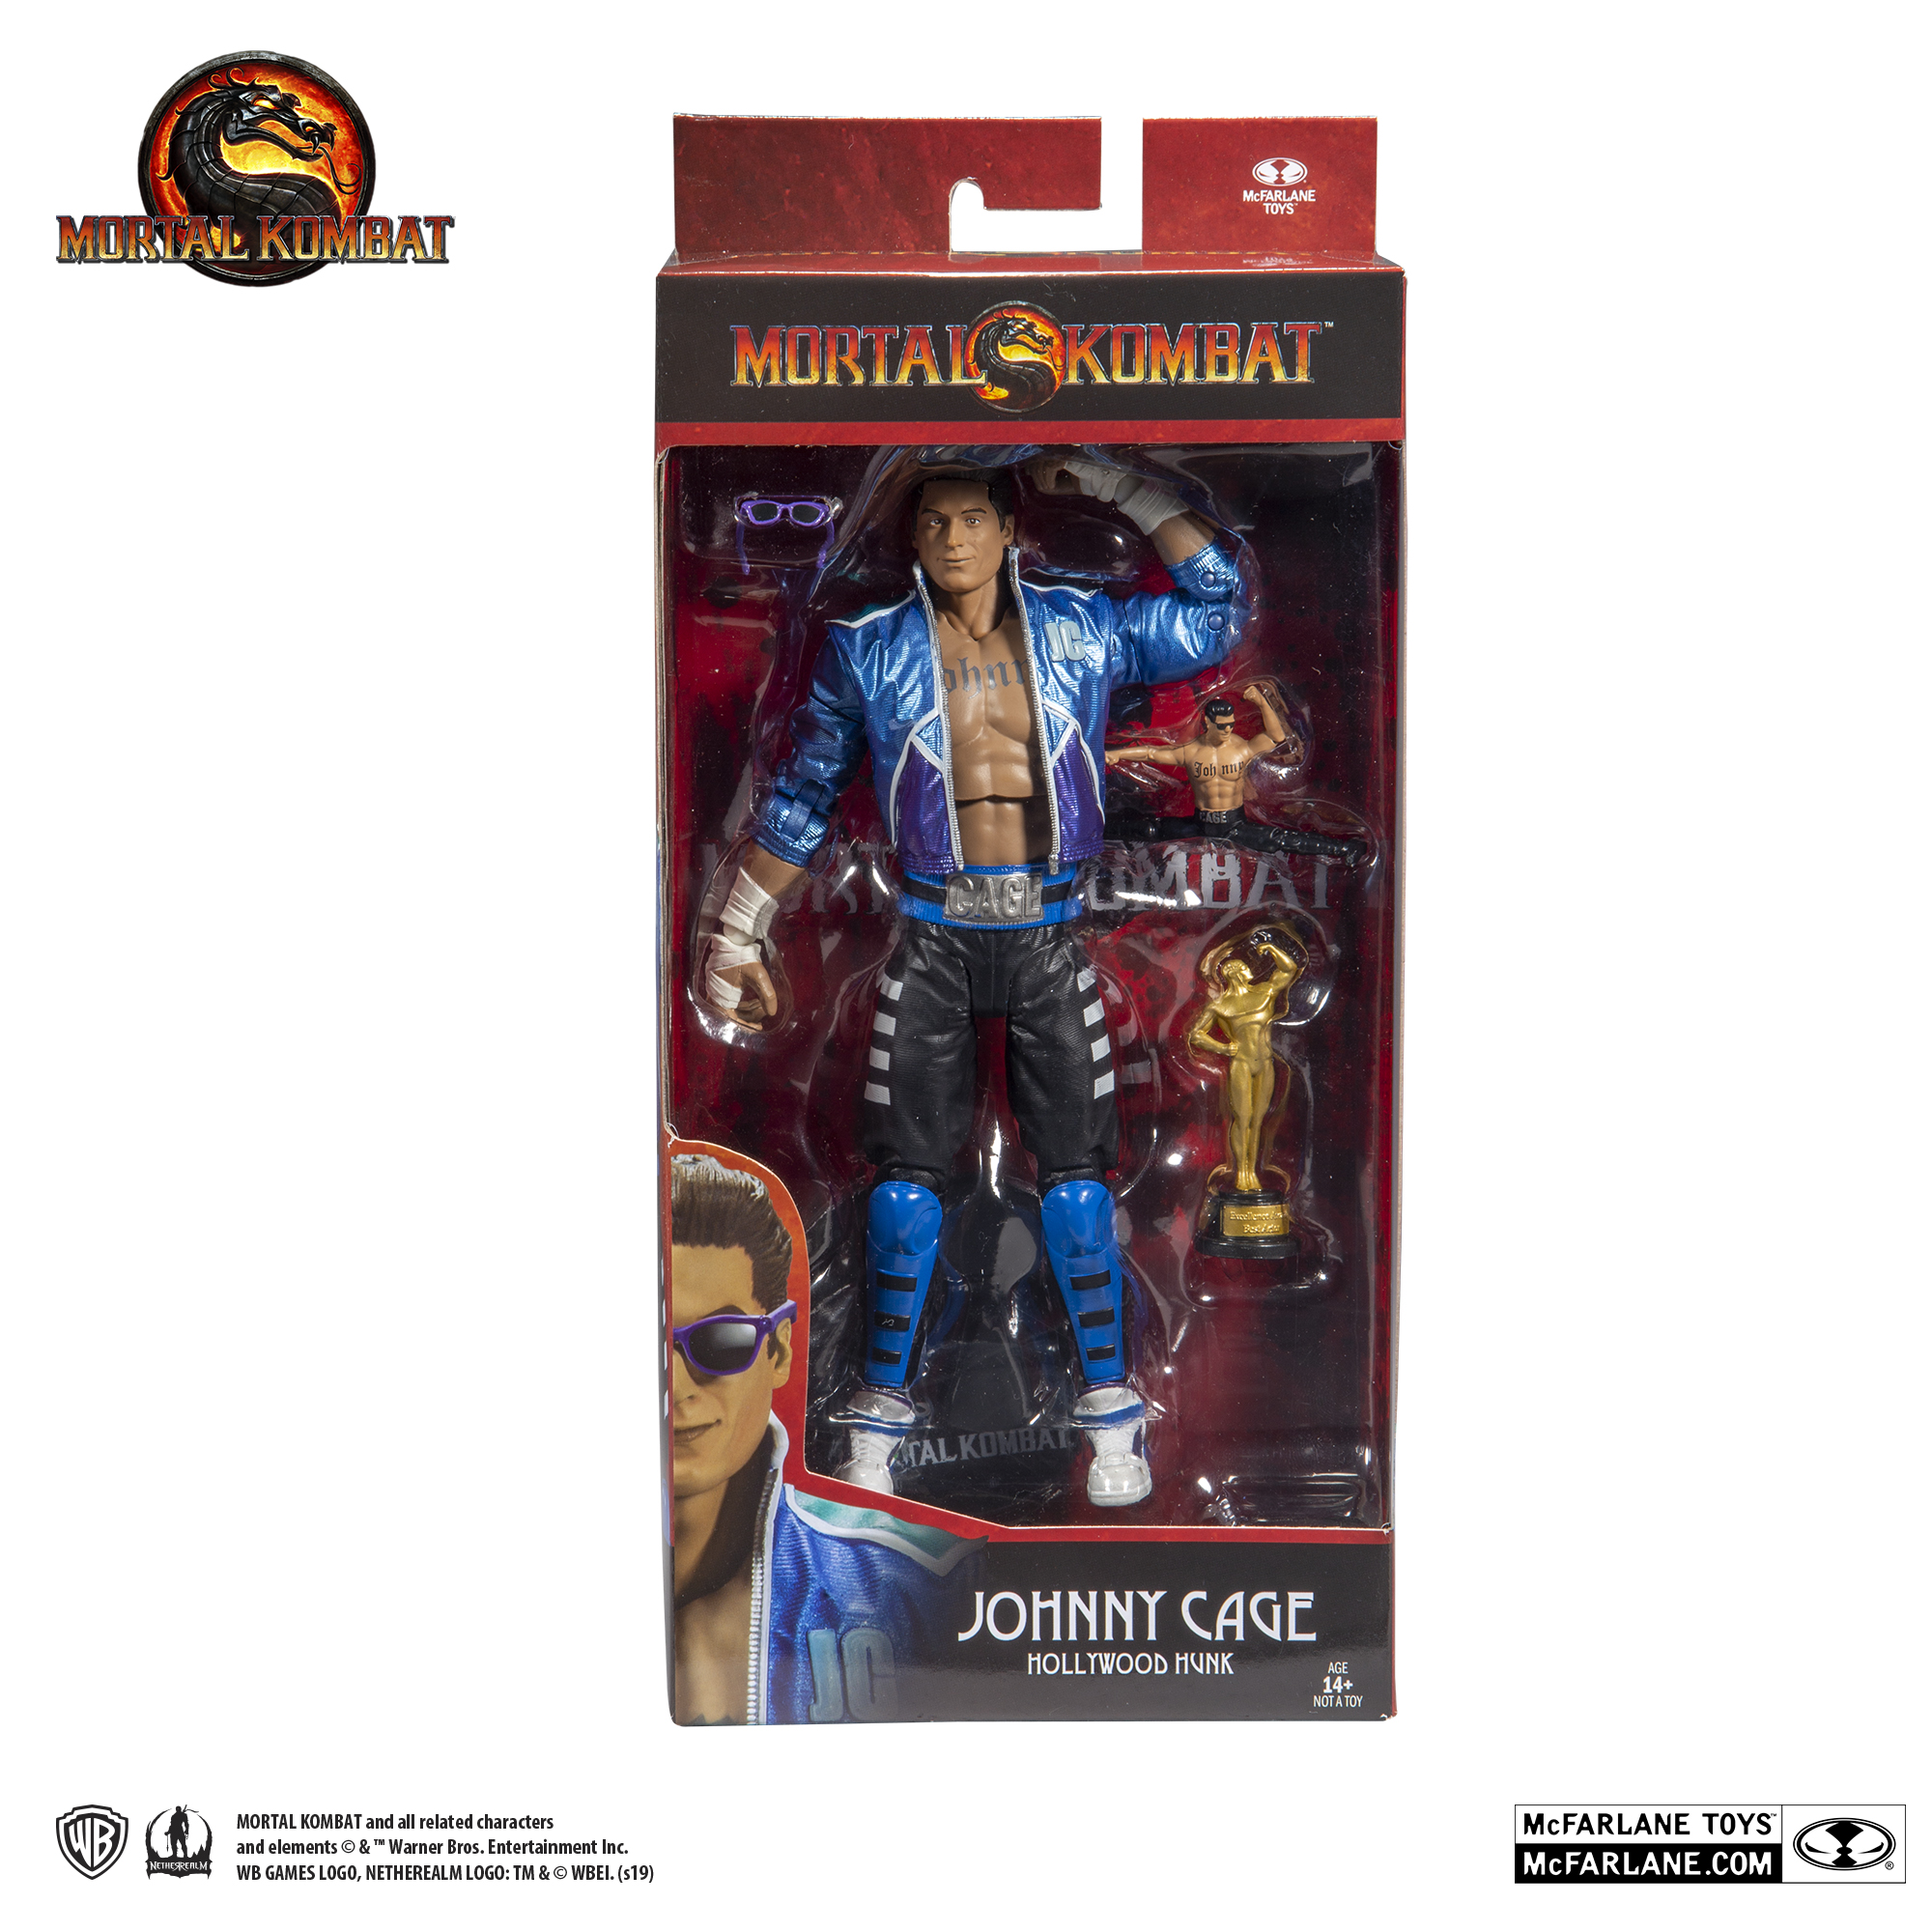 johnny cage figure